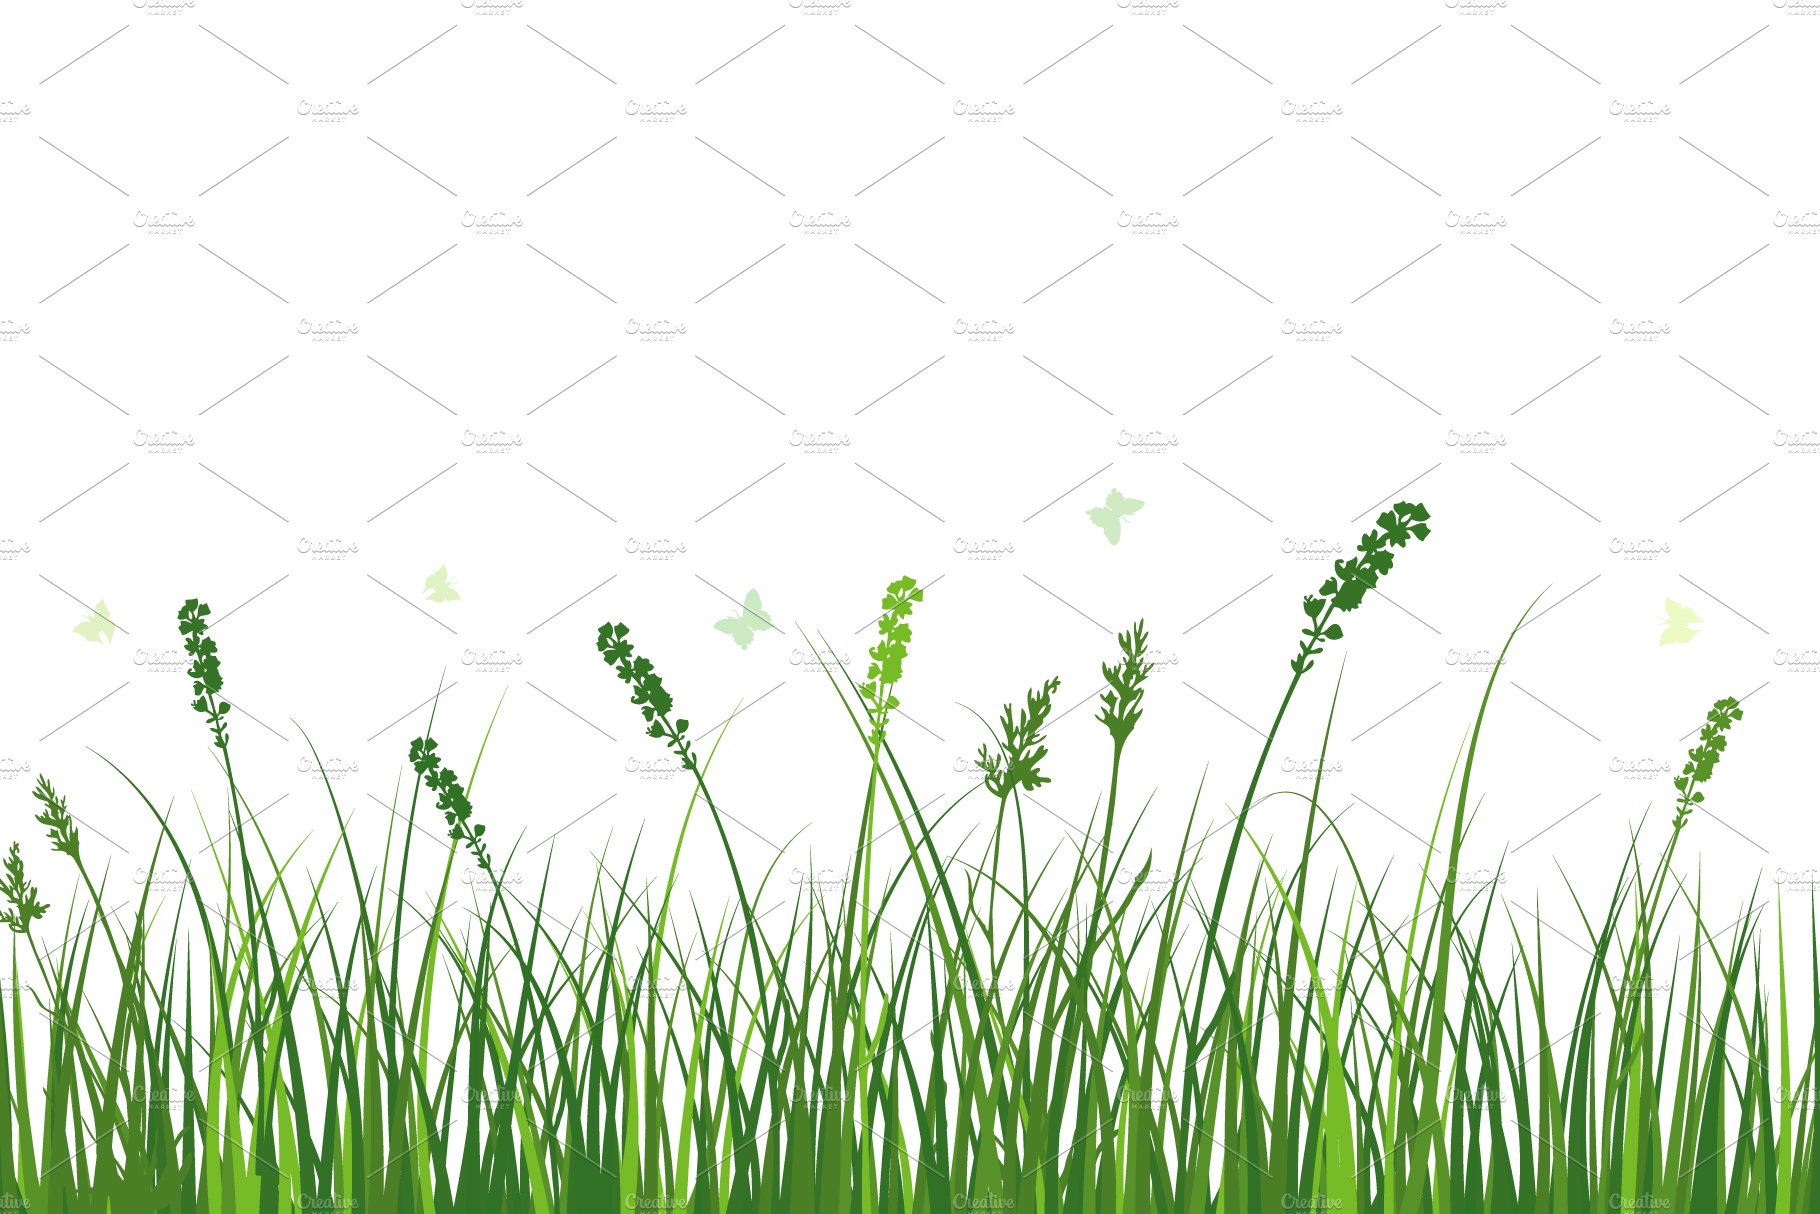 Green Grass Meadow preview image.